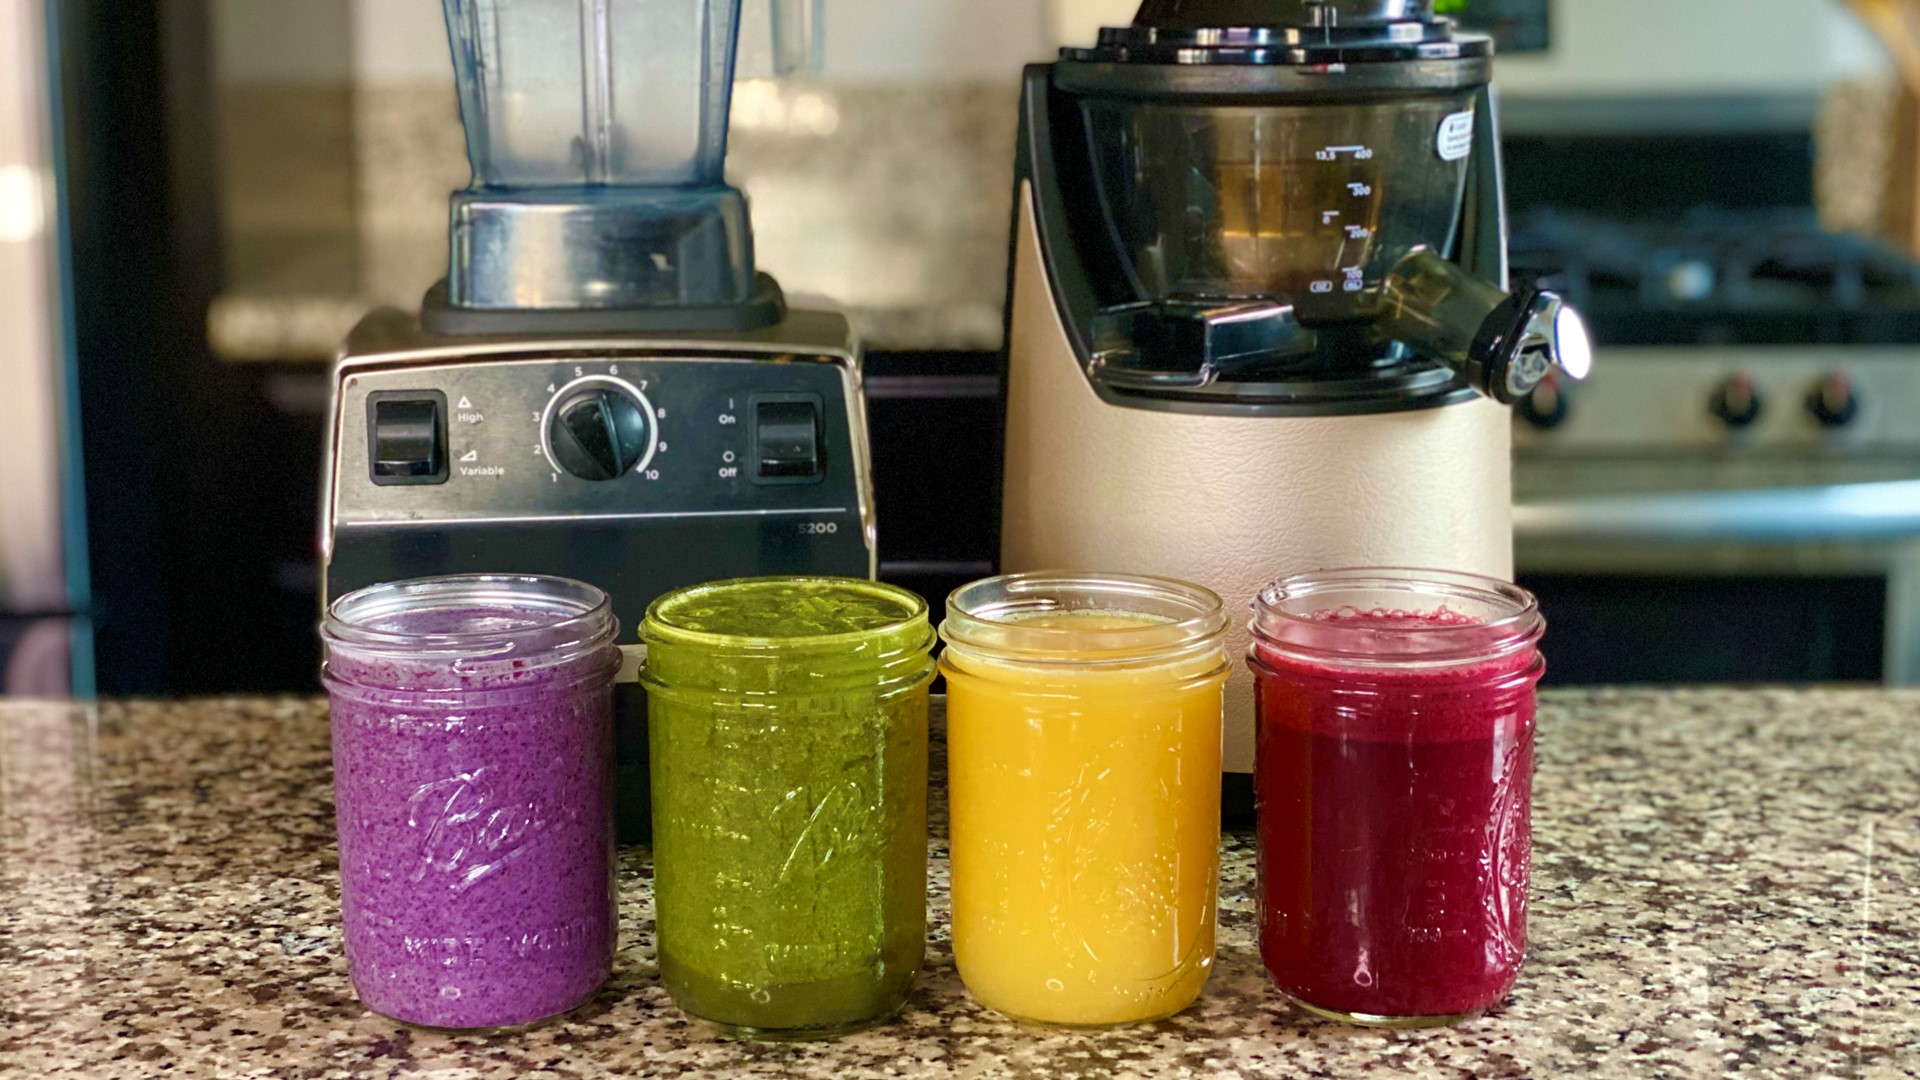 Smoothies or juices? What's the difference between them? Which one is better for you?